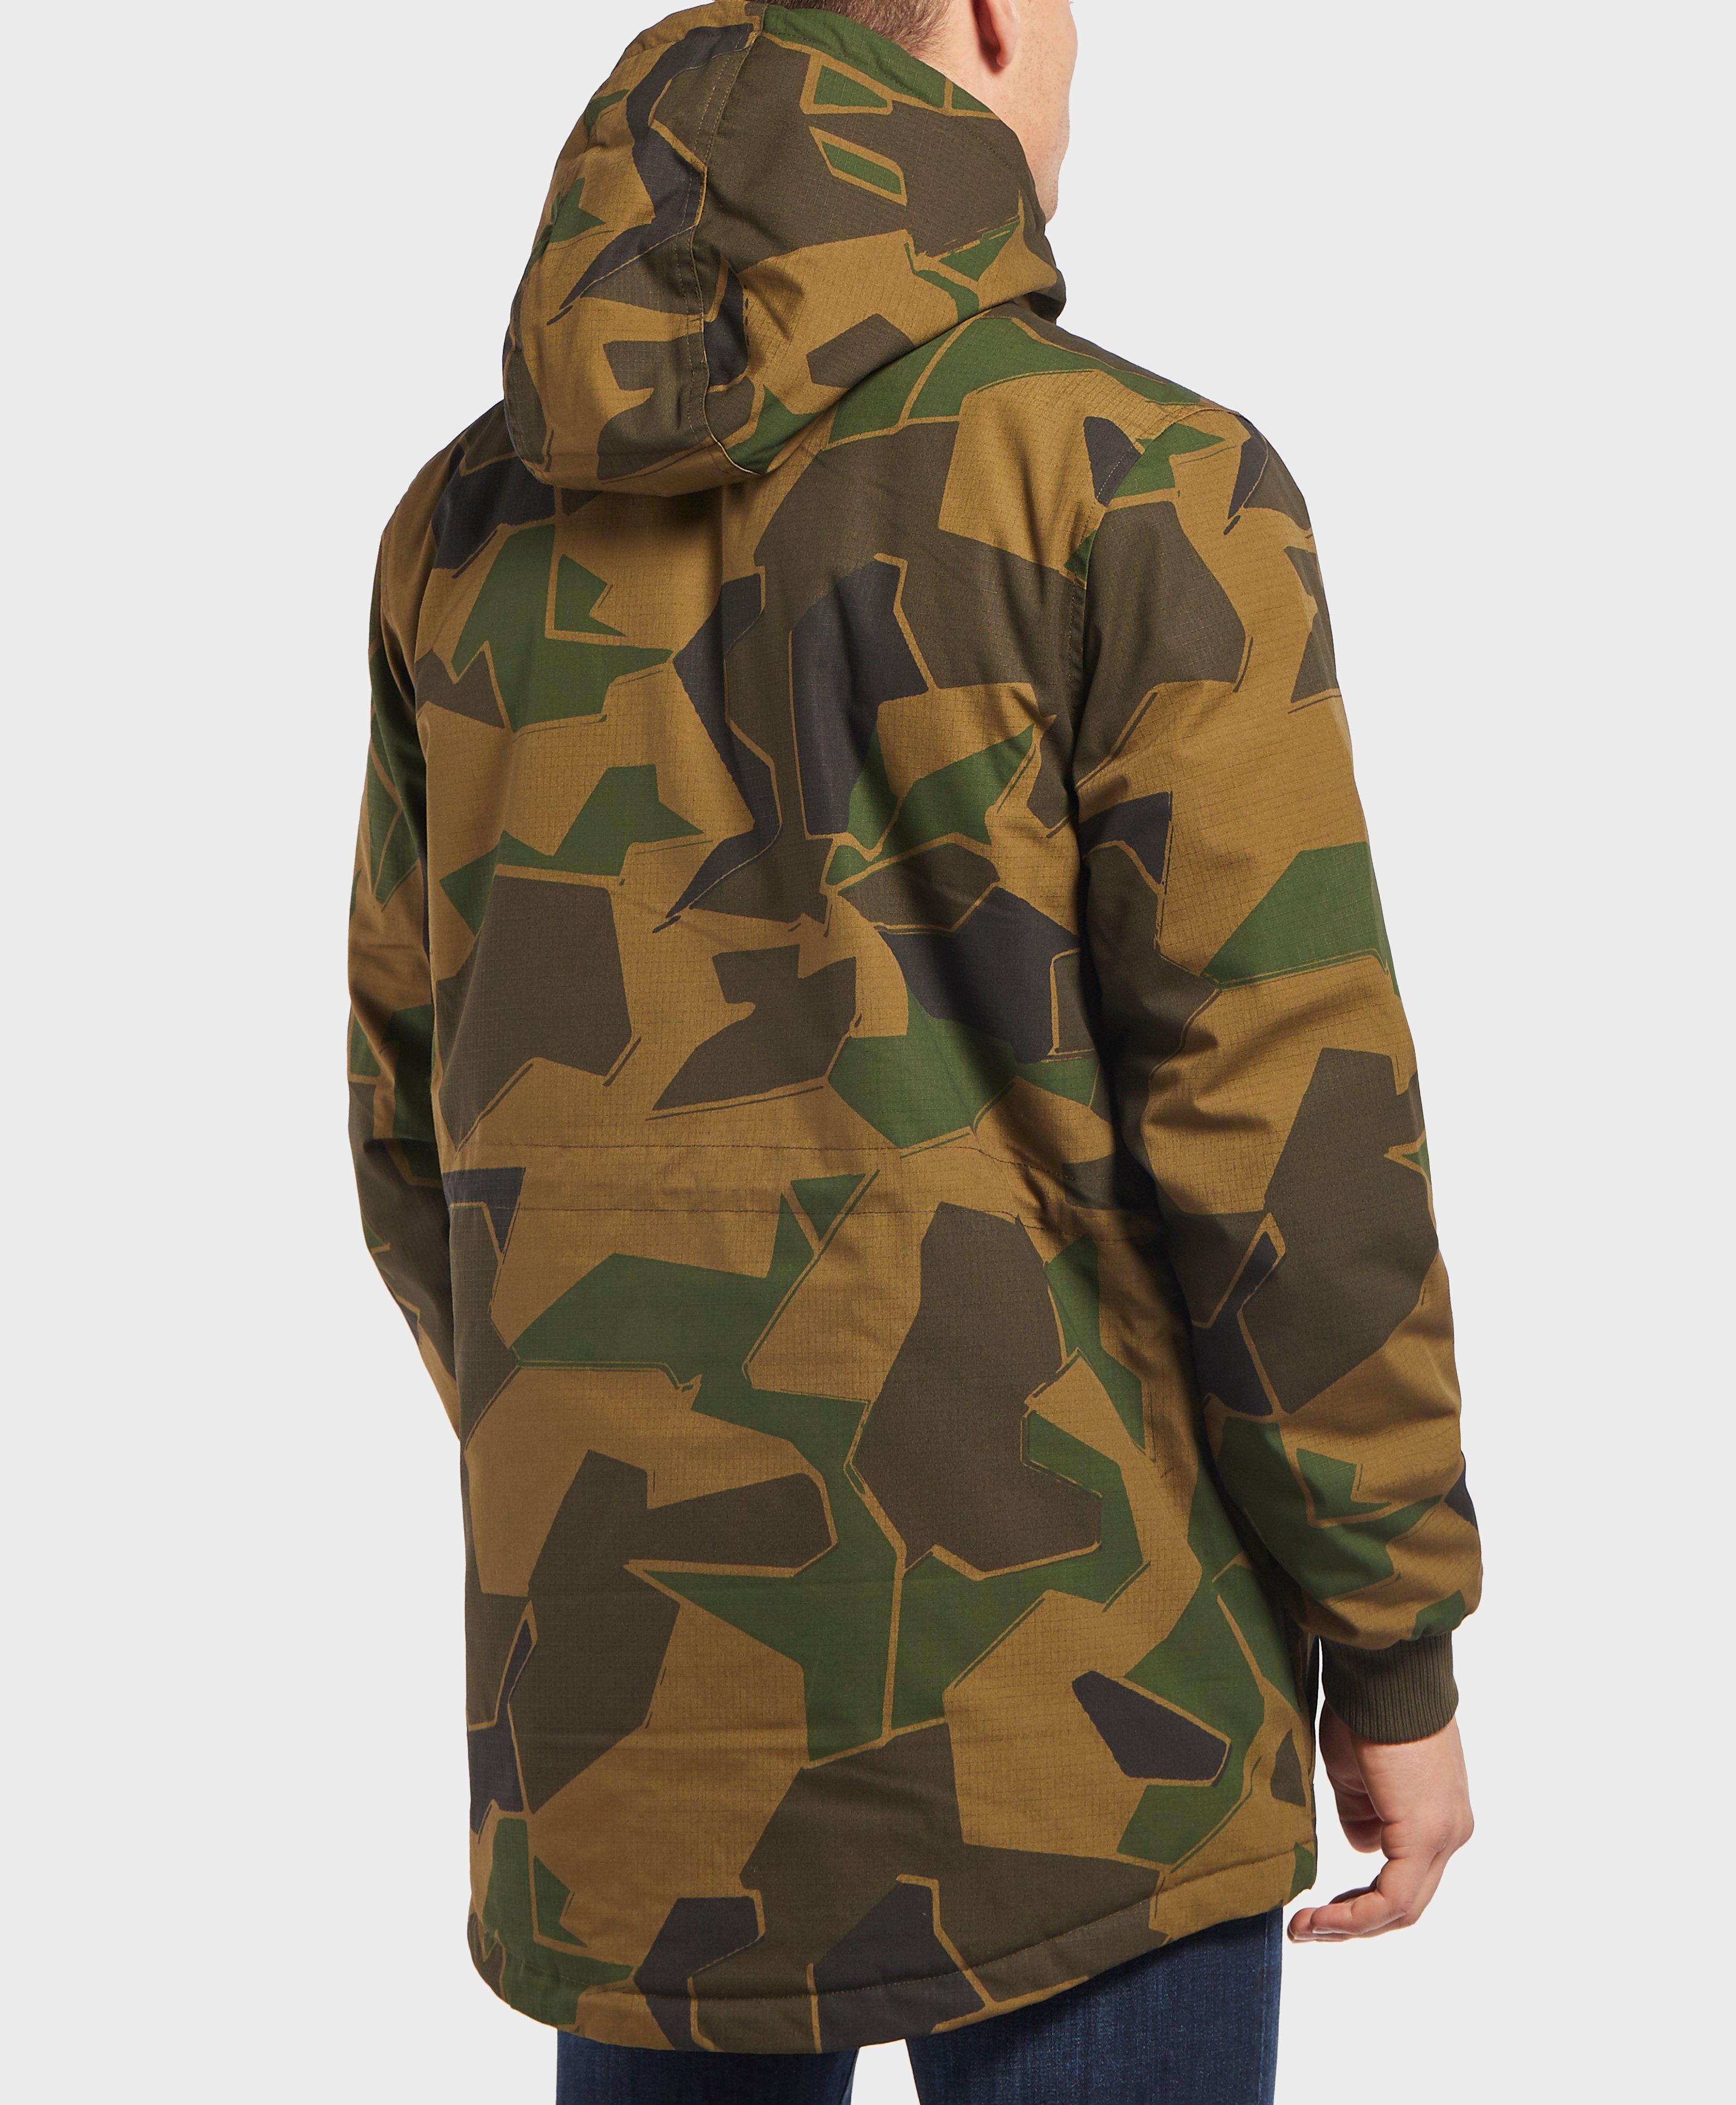 Fred Perry Synthetic X Arktis Stockport Camo Jacket in Green for Men - Lyst